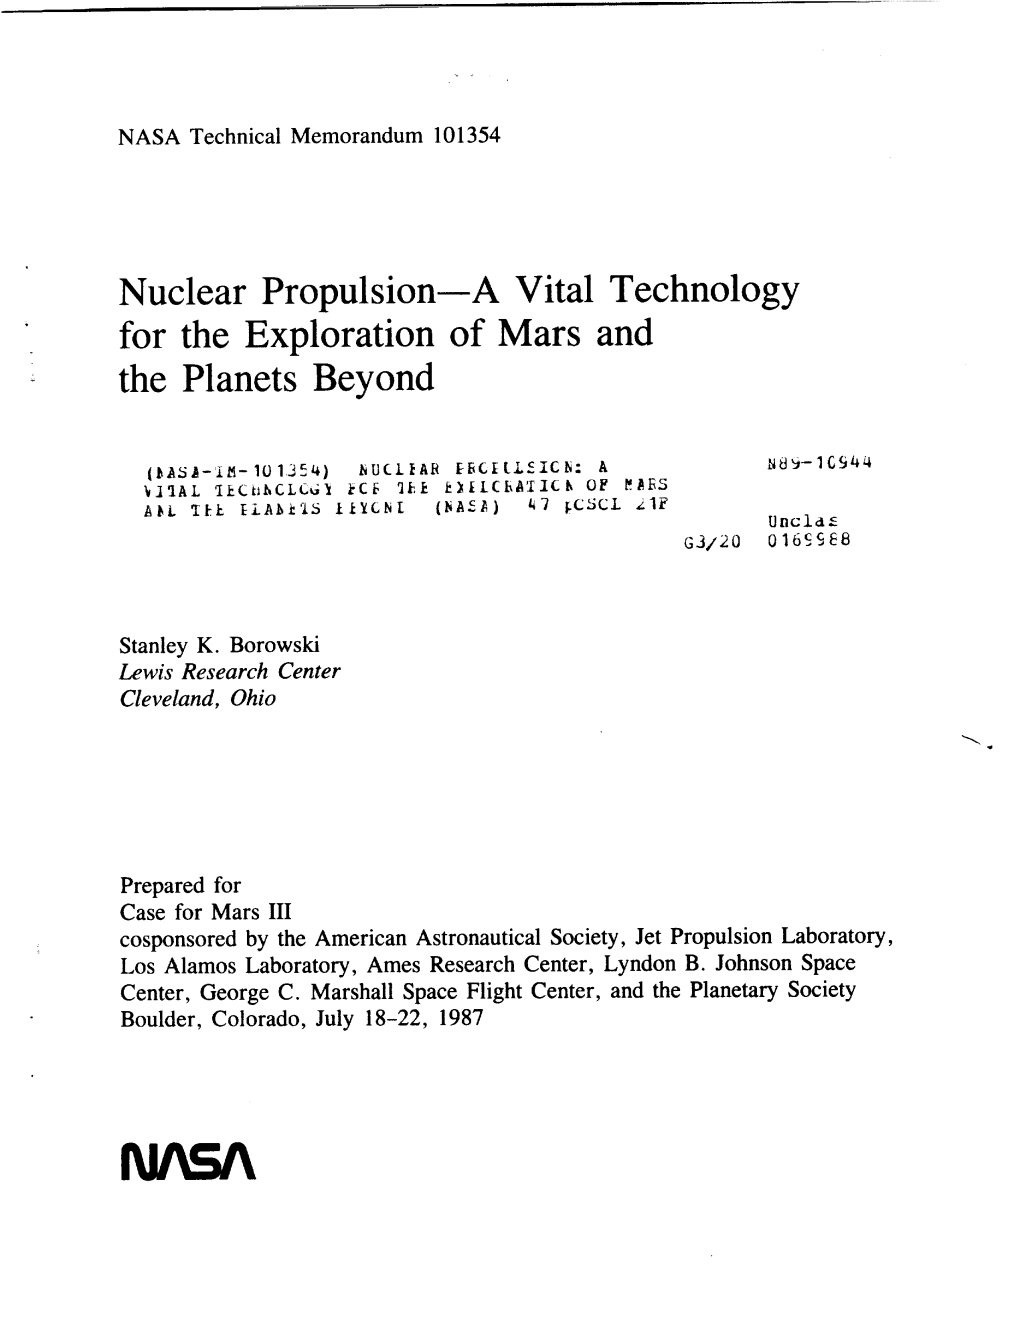 Nuclear Propulsion--A Vital Technology for the Exploration of Mars and the Planets Beyond